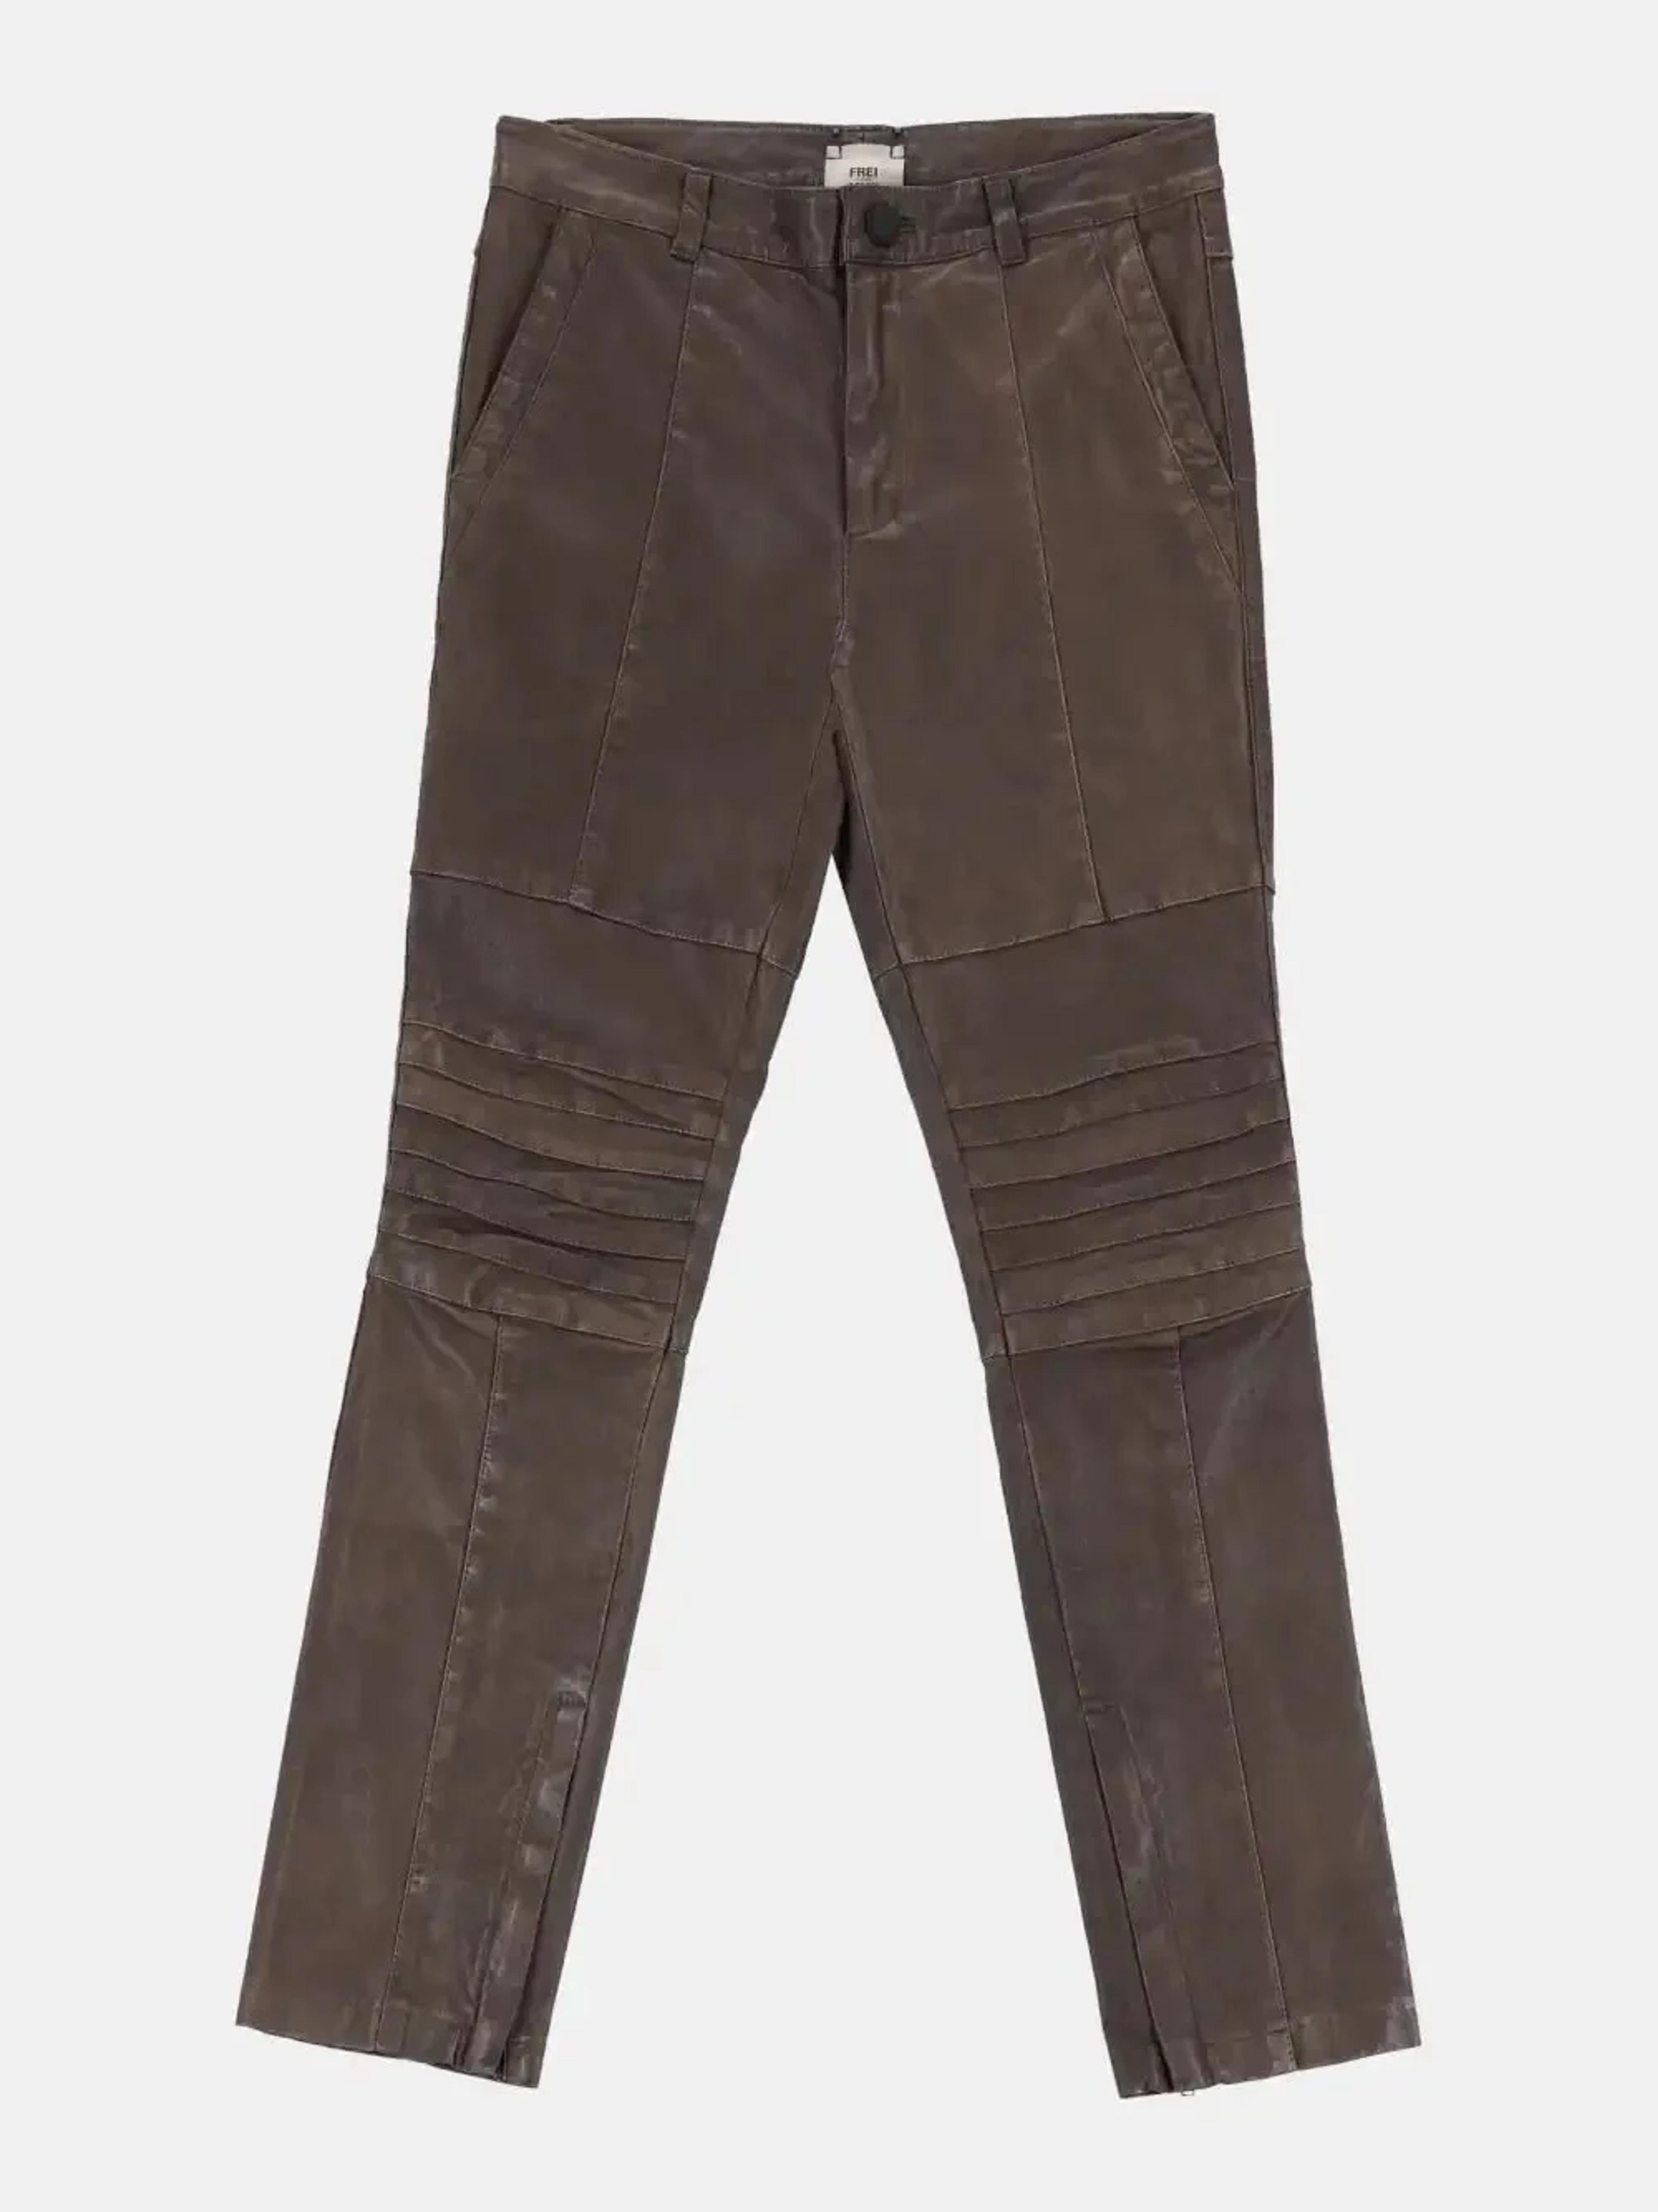 Frei Mut "FAUST" leather pants - LECLAIREUR